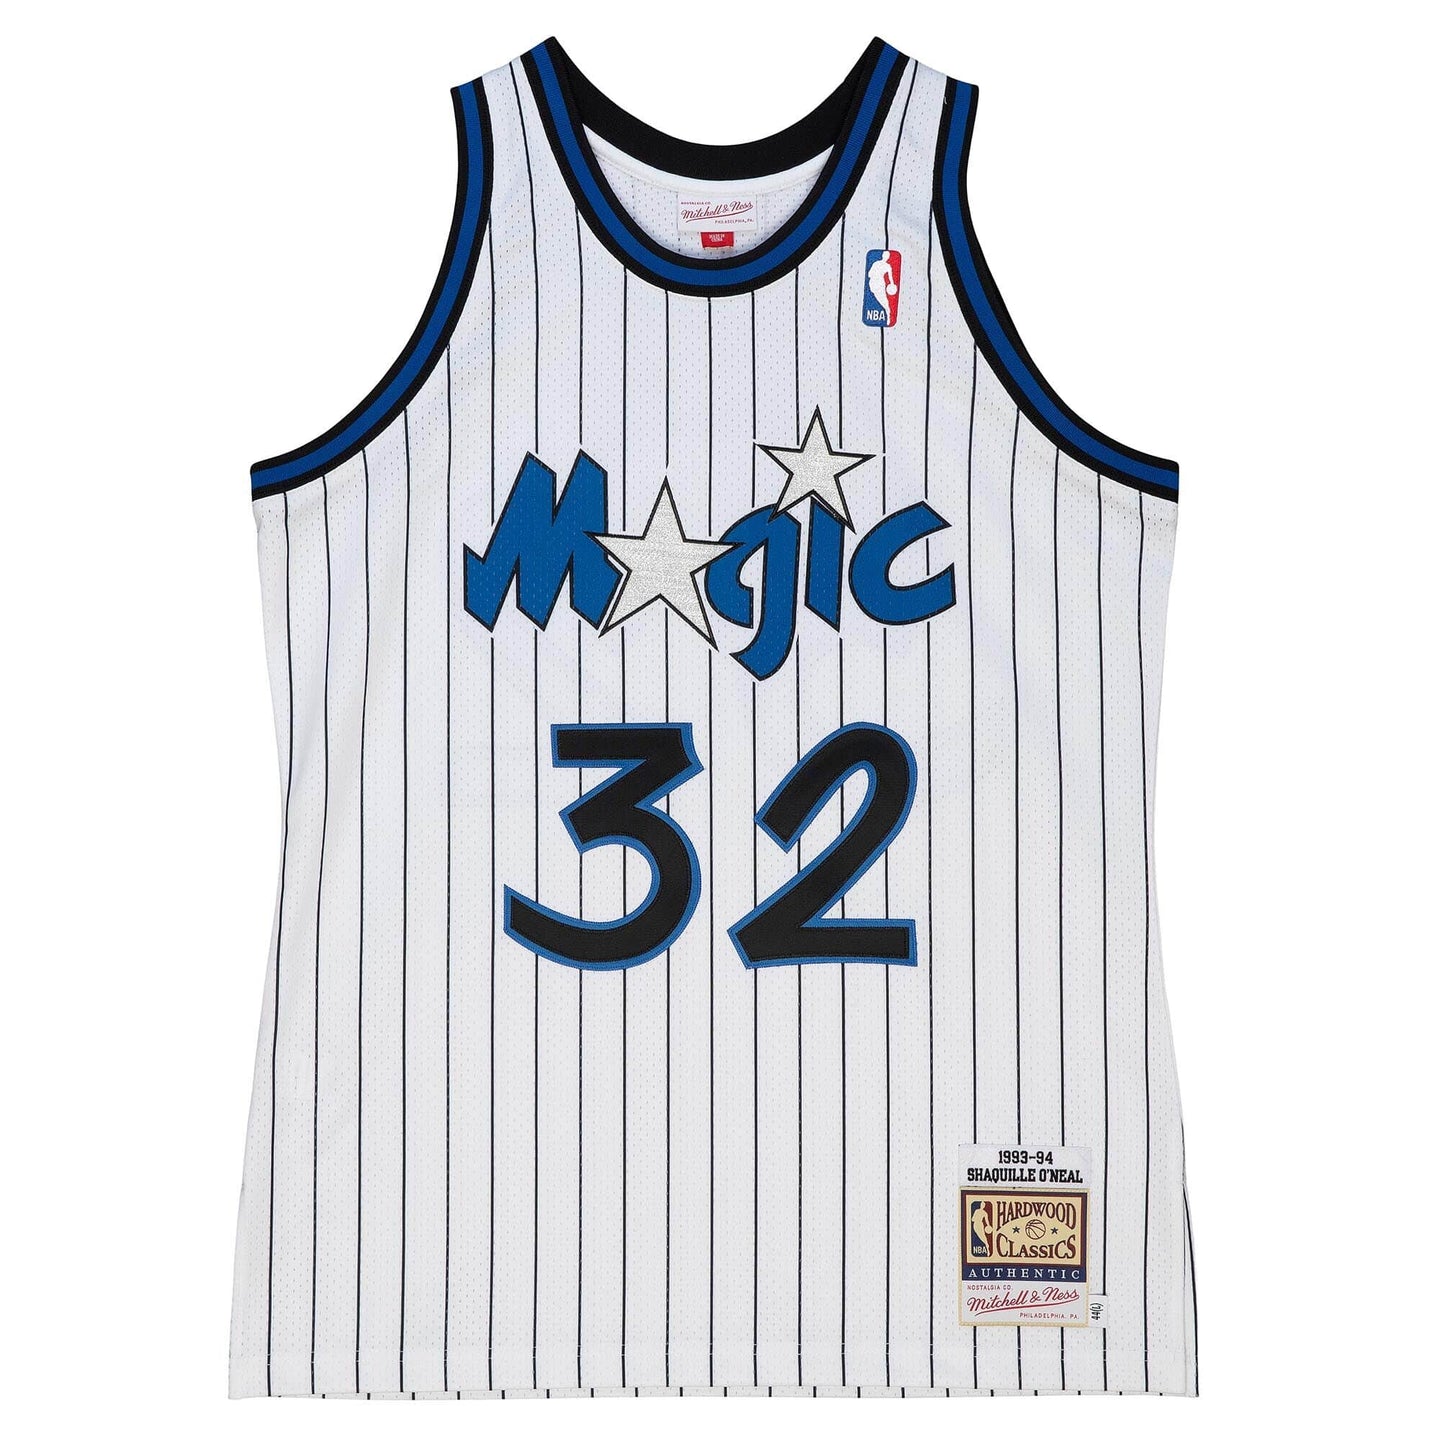 Mitchell & Ness Authentic Shaquille O'Neal Orlando Magic 1993-94 Jersey